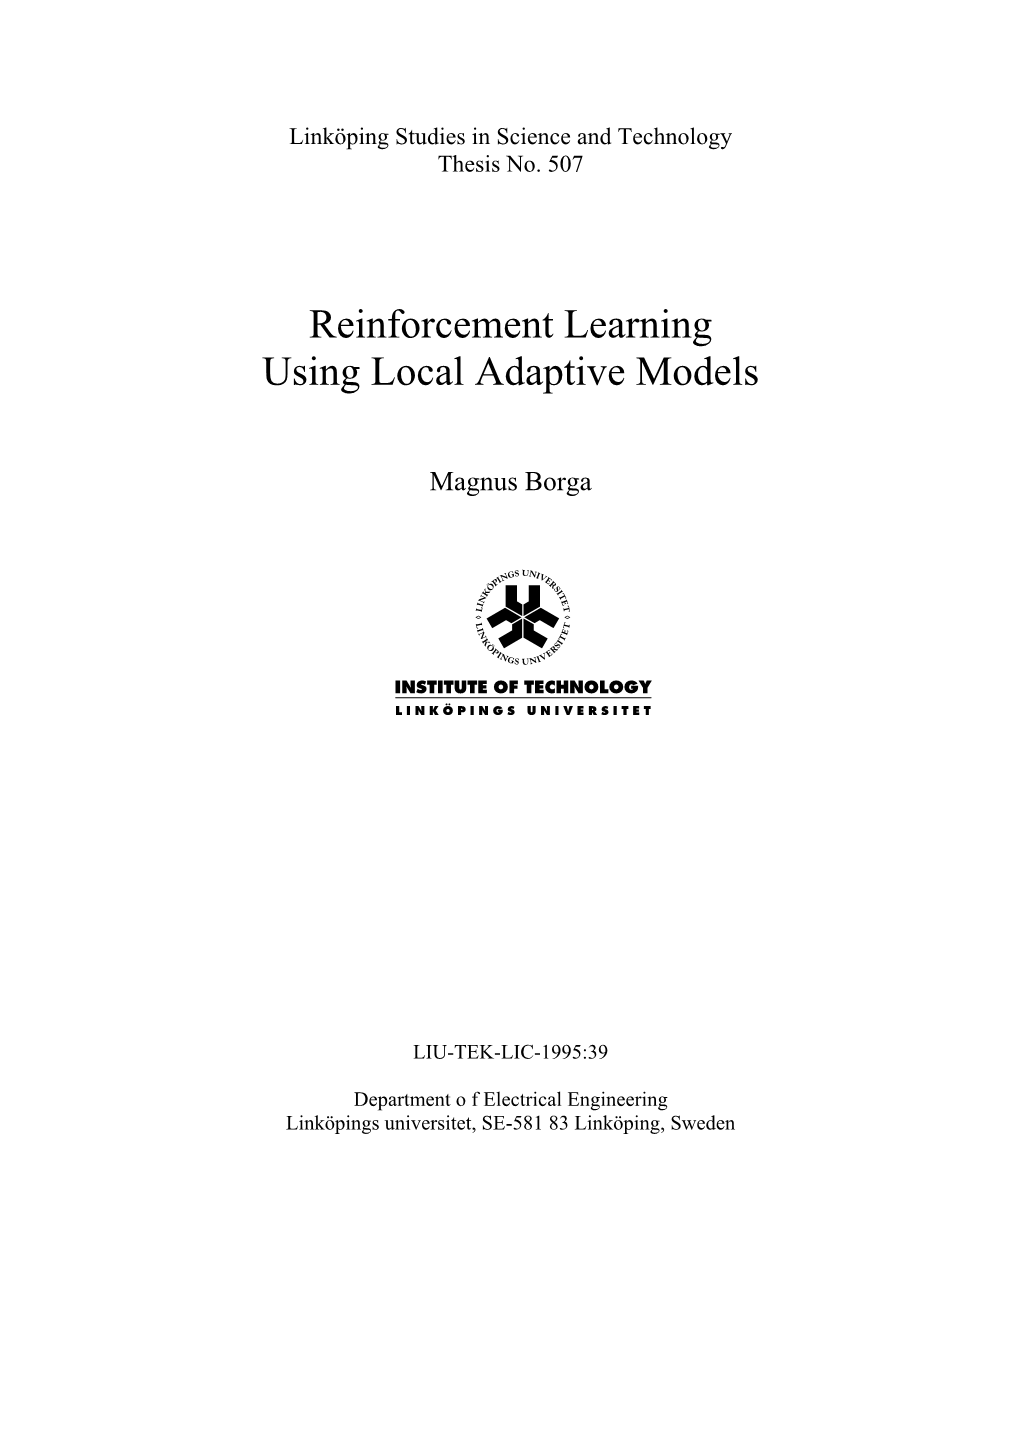 Reinforcement Learning Using Local Adaptive Models